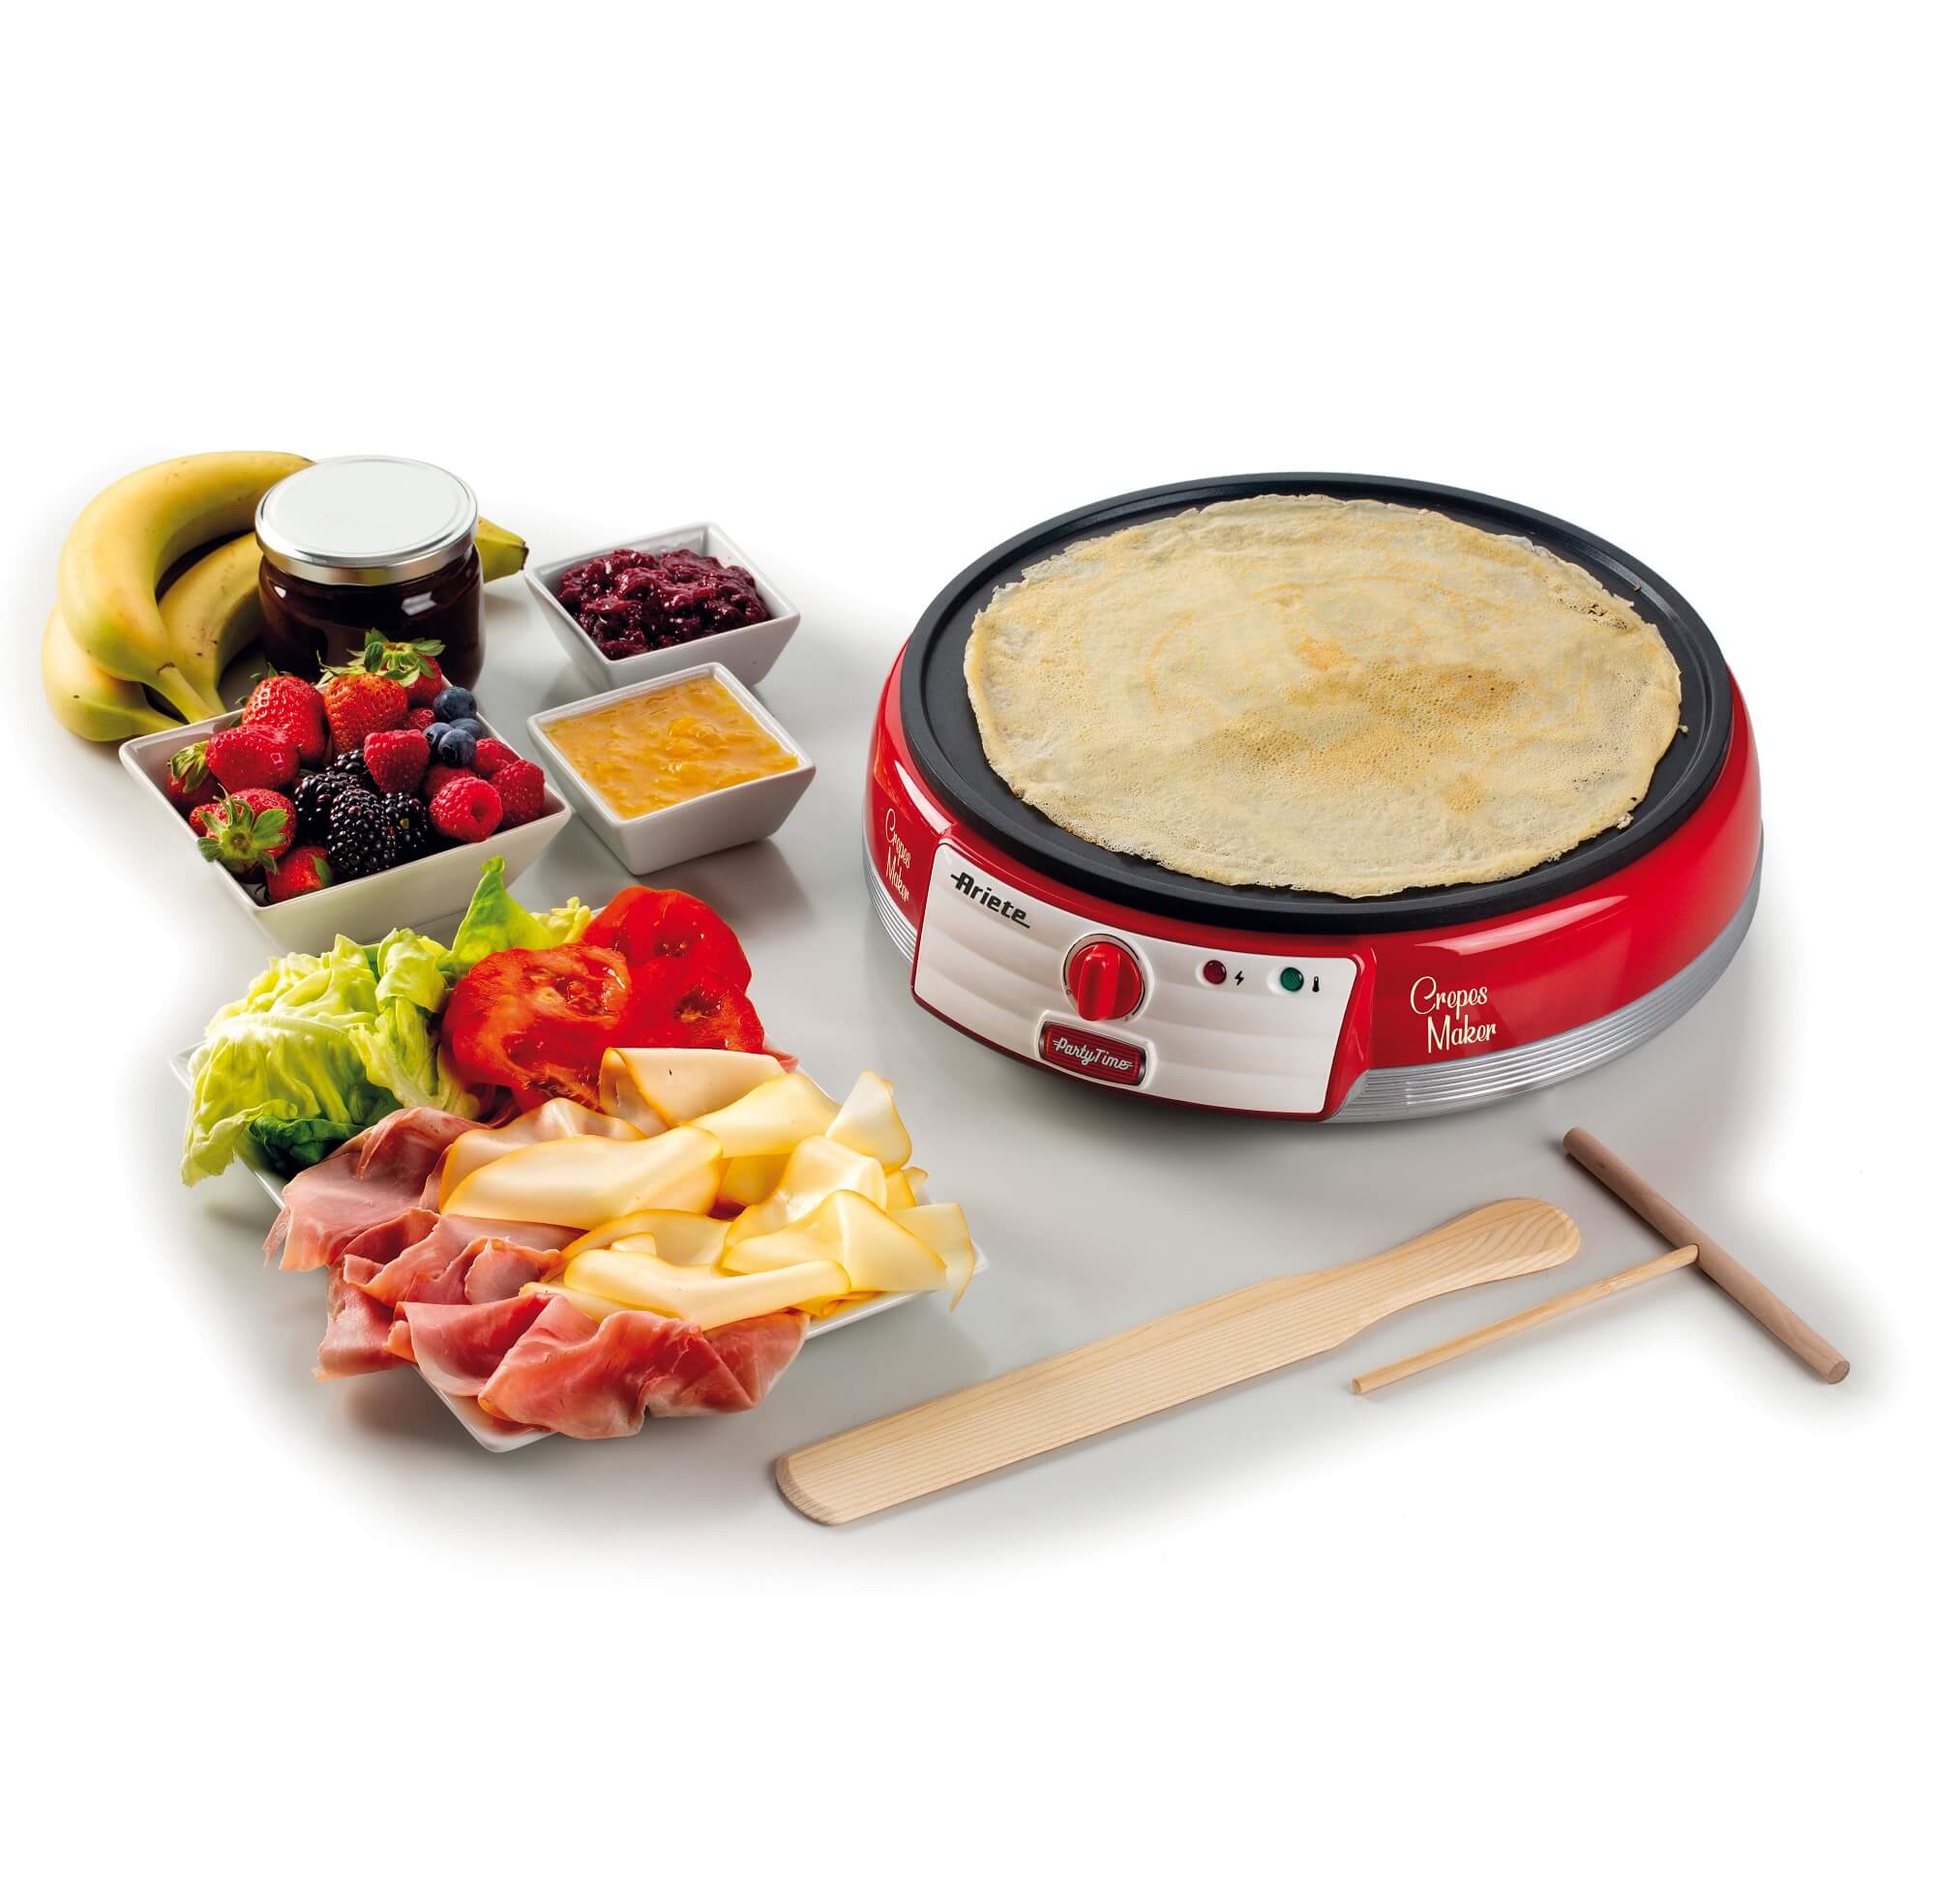 ARIETE CREPES MAKER 202 ROSSA PIASTRA ELETTRICA PER PANCAKES PARTY TIME 